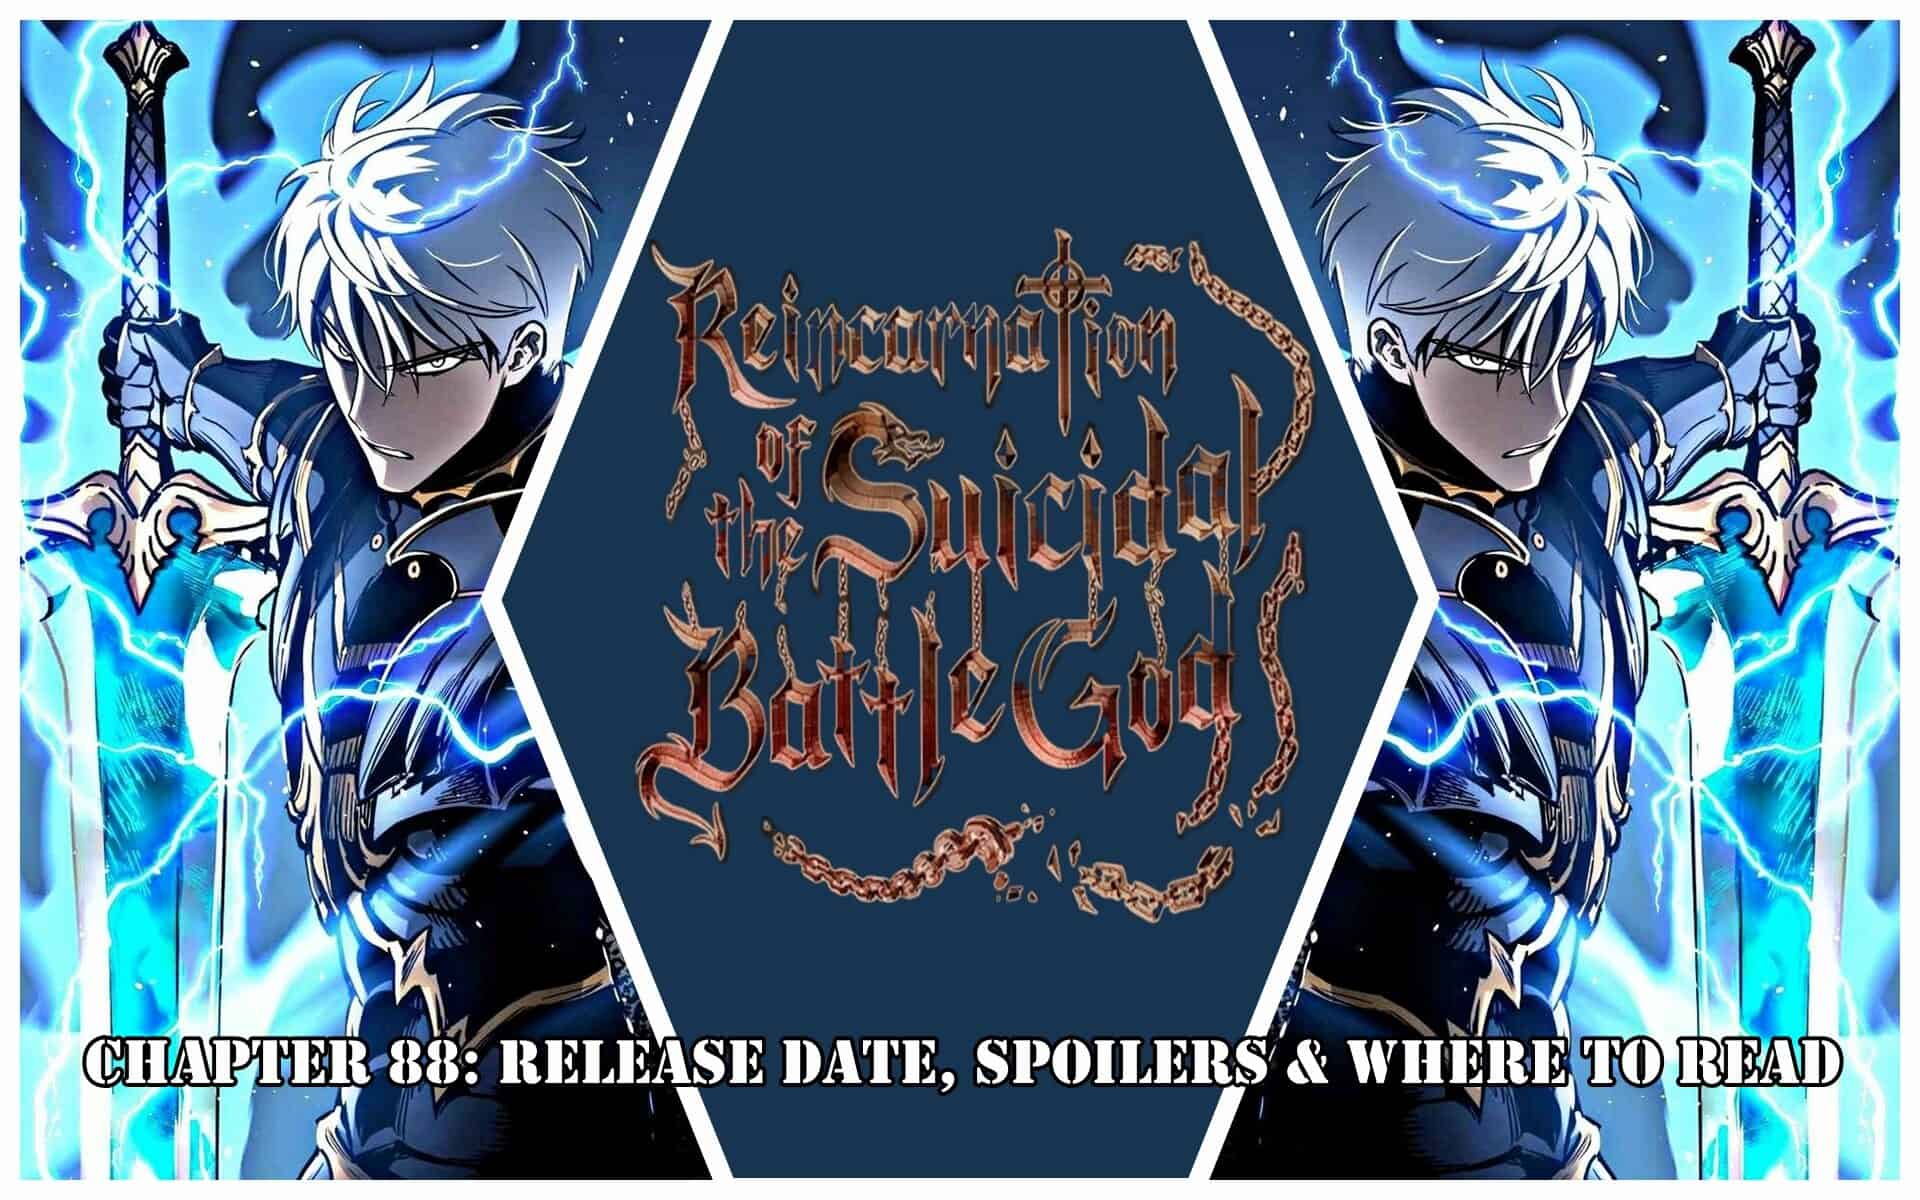 Reincarnation Of The Suicidal Battle God Chapter 88: Release Date, Spoilers & Where to Read